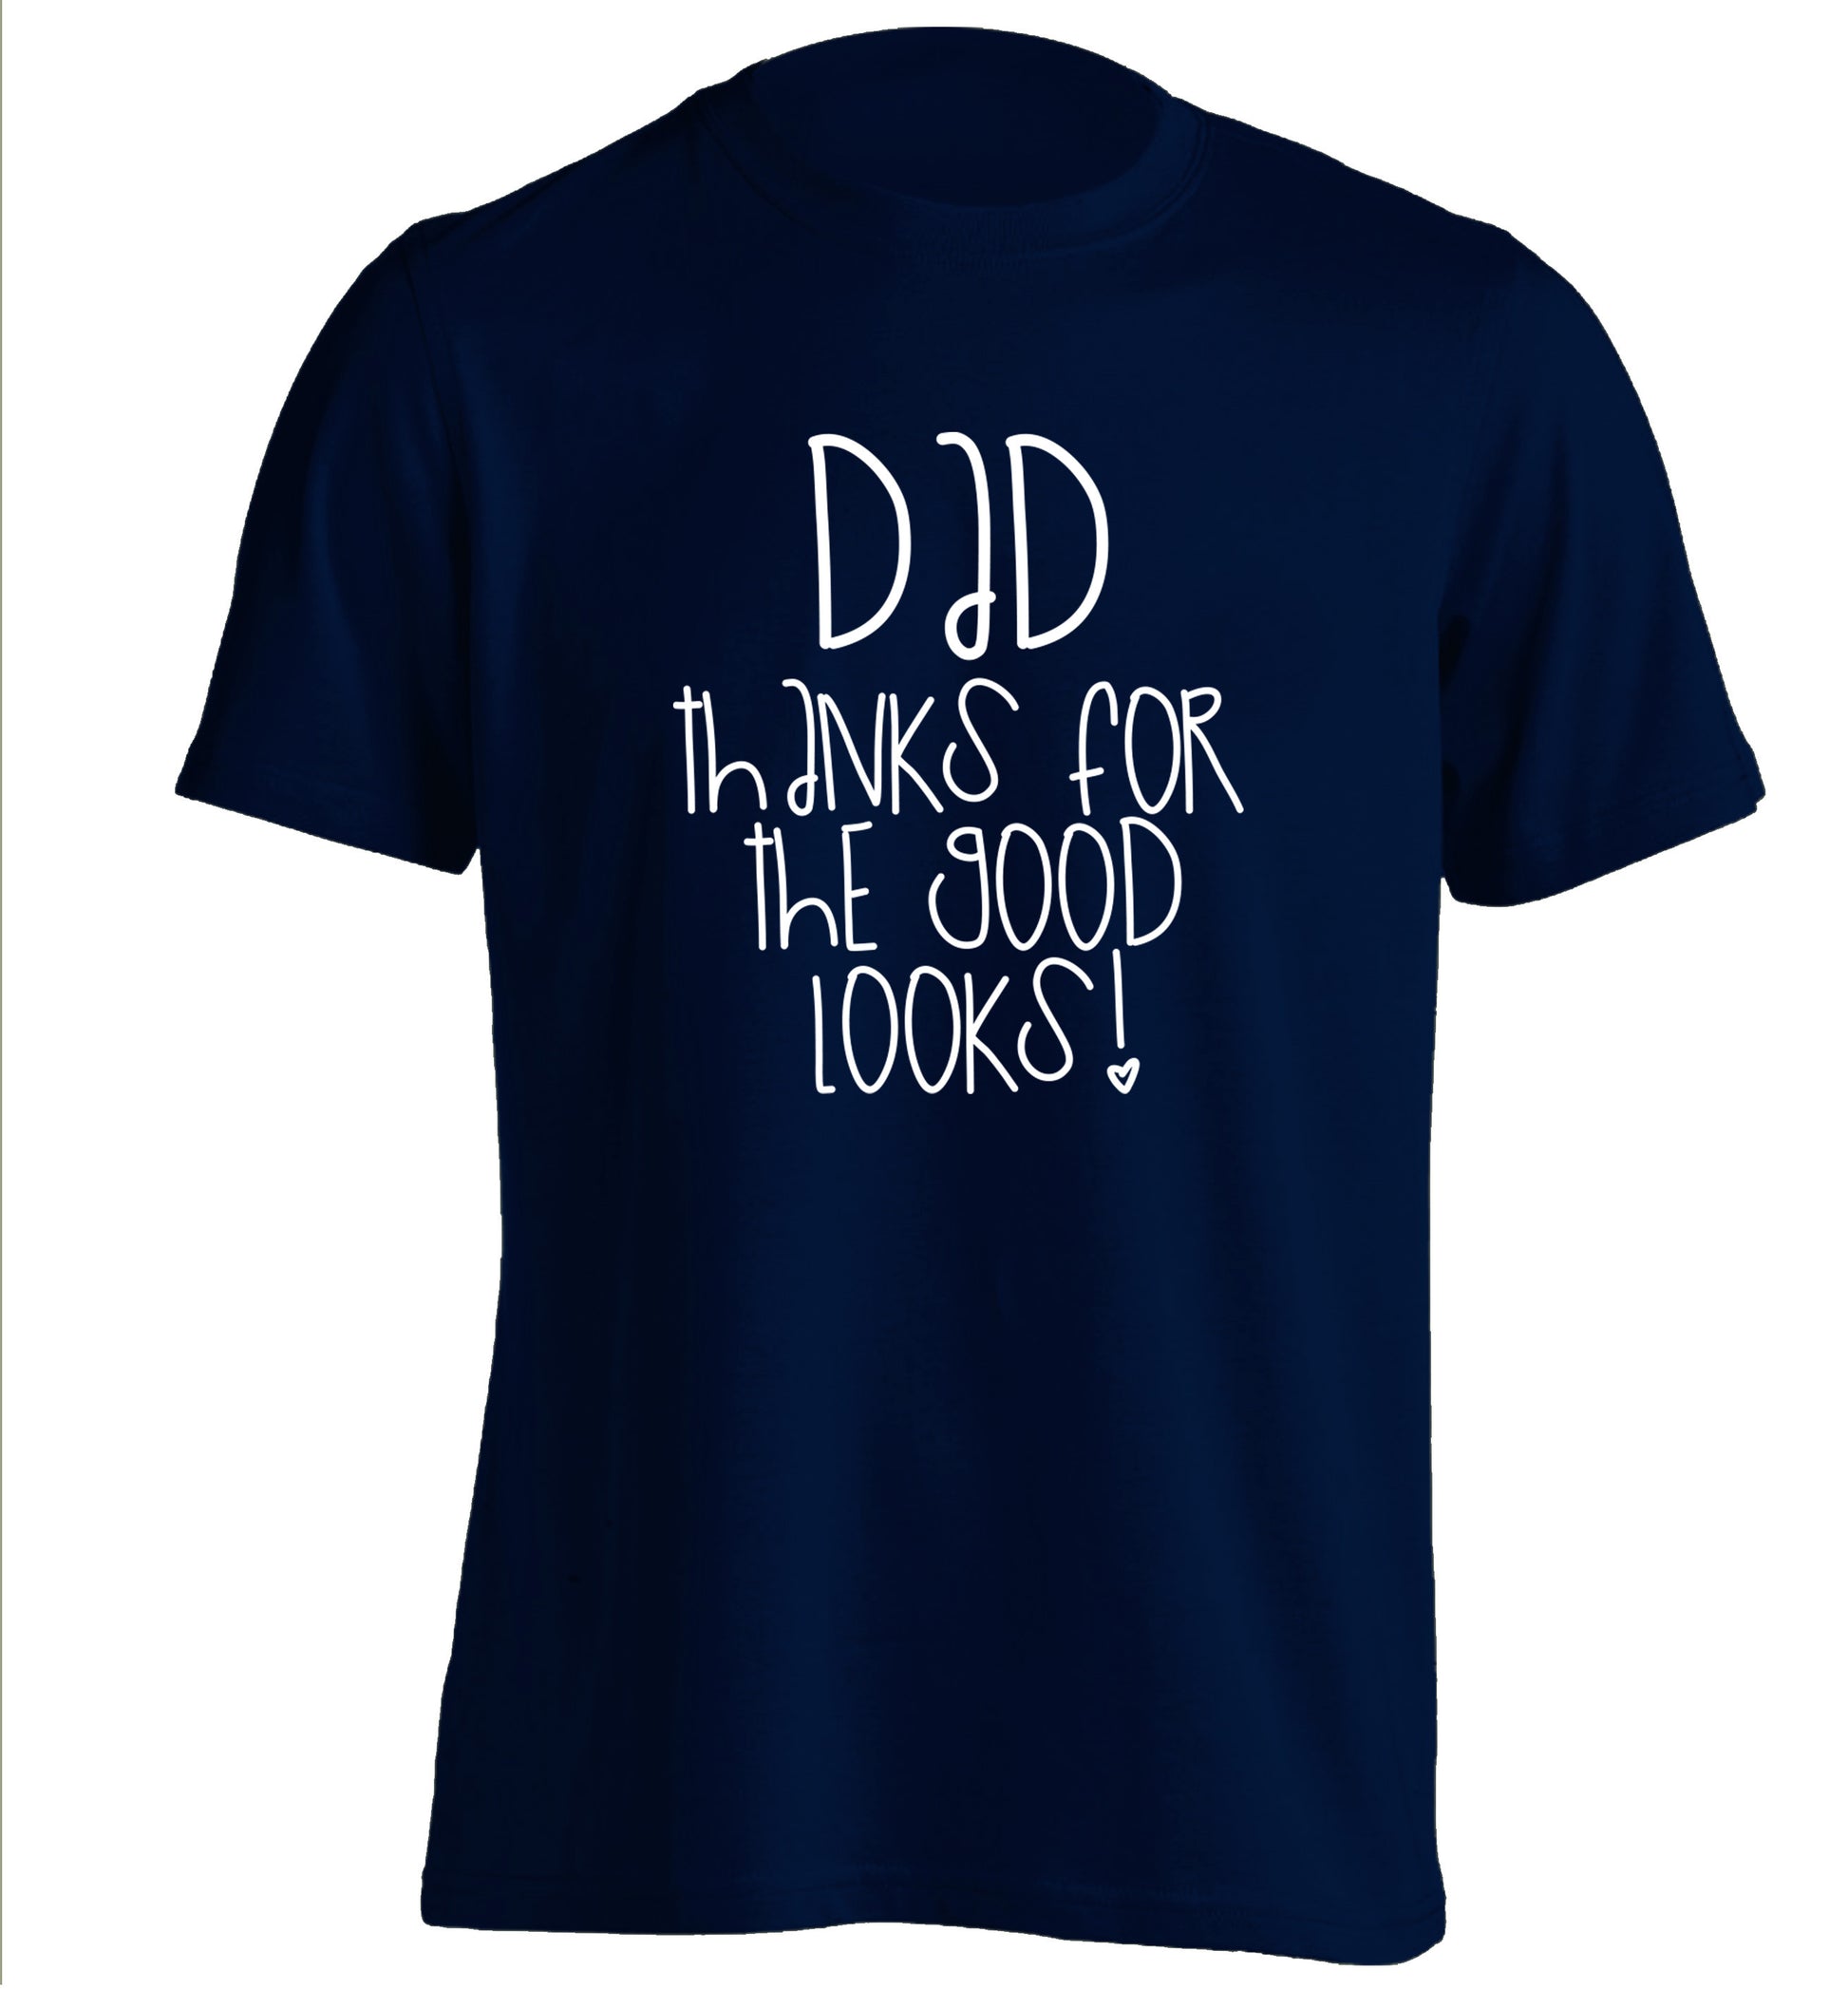 Dad thanks for the good looks adults unisex navy Tshirt 2XL